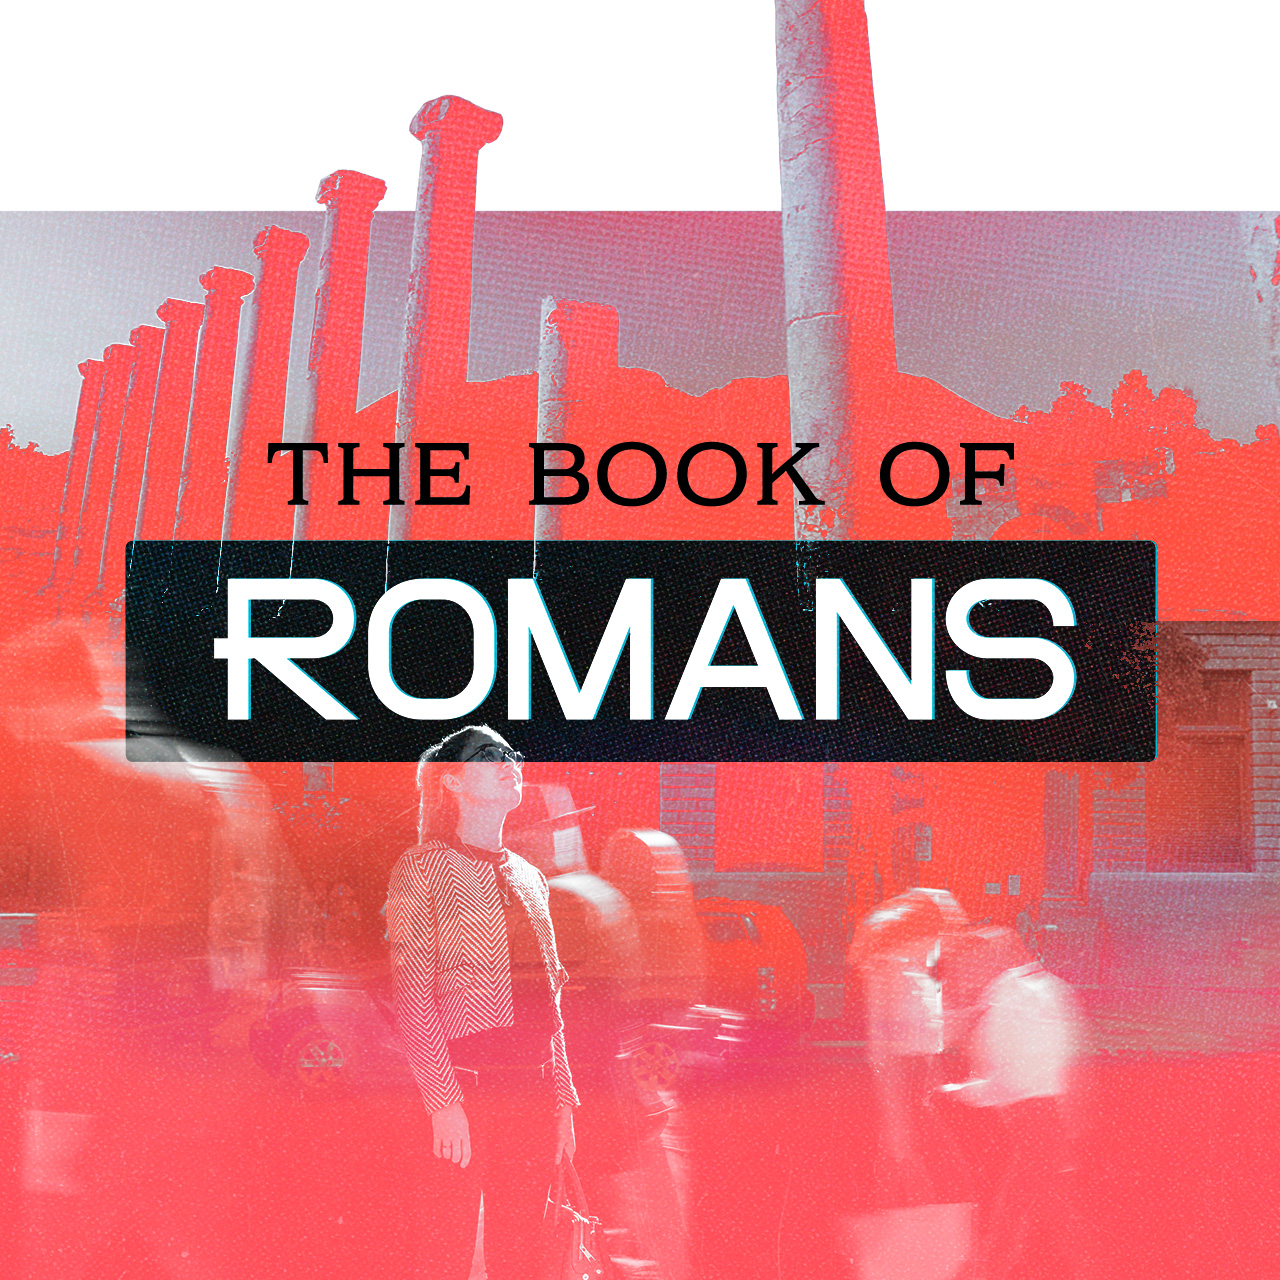 The Book of Romans: The Religious Condemned